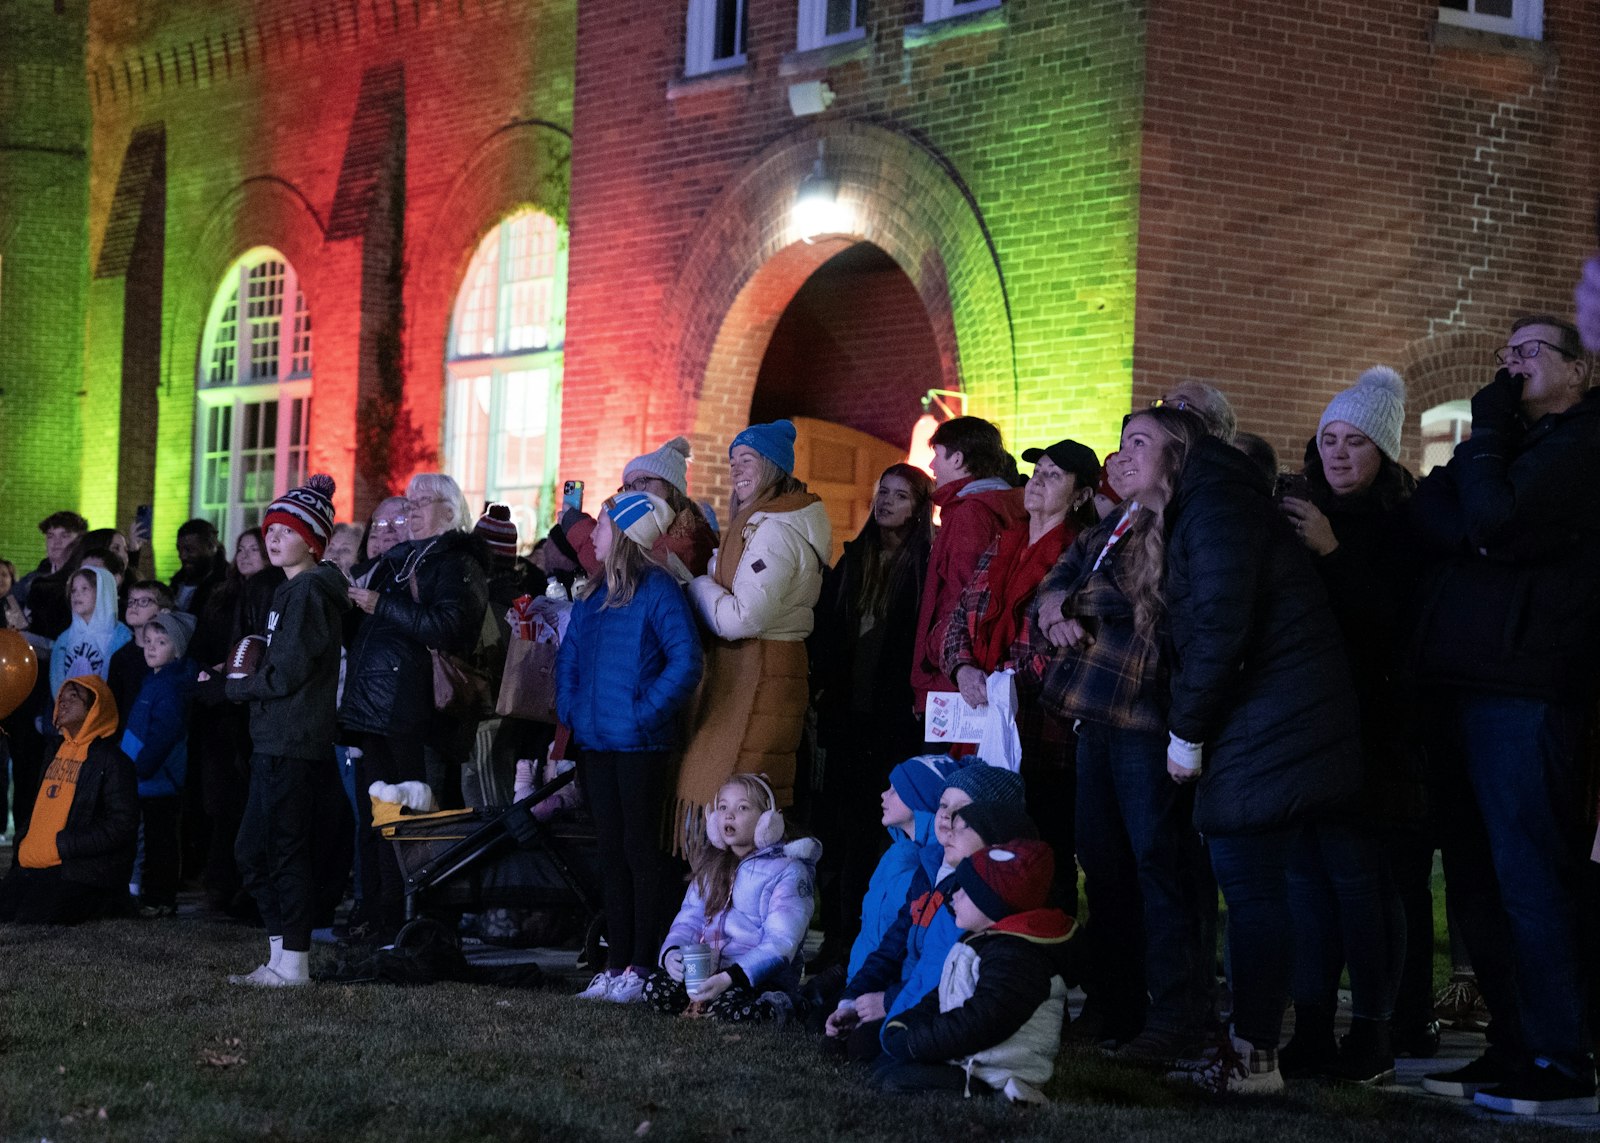 Families "ooh" and "ahh" as the Christmas tree is lit at the center of campus Nov. 19. (Gabriella Patti | Detroit Catholic)